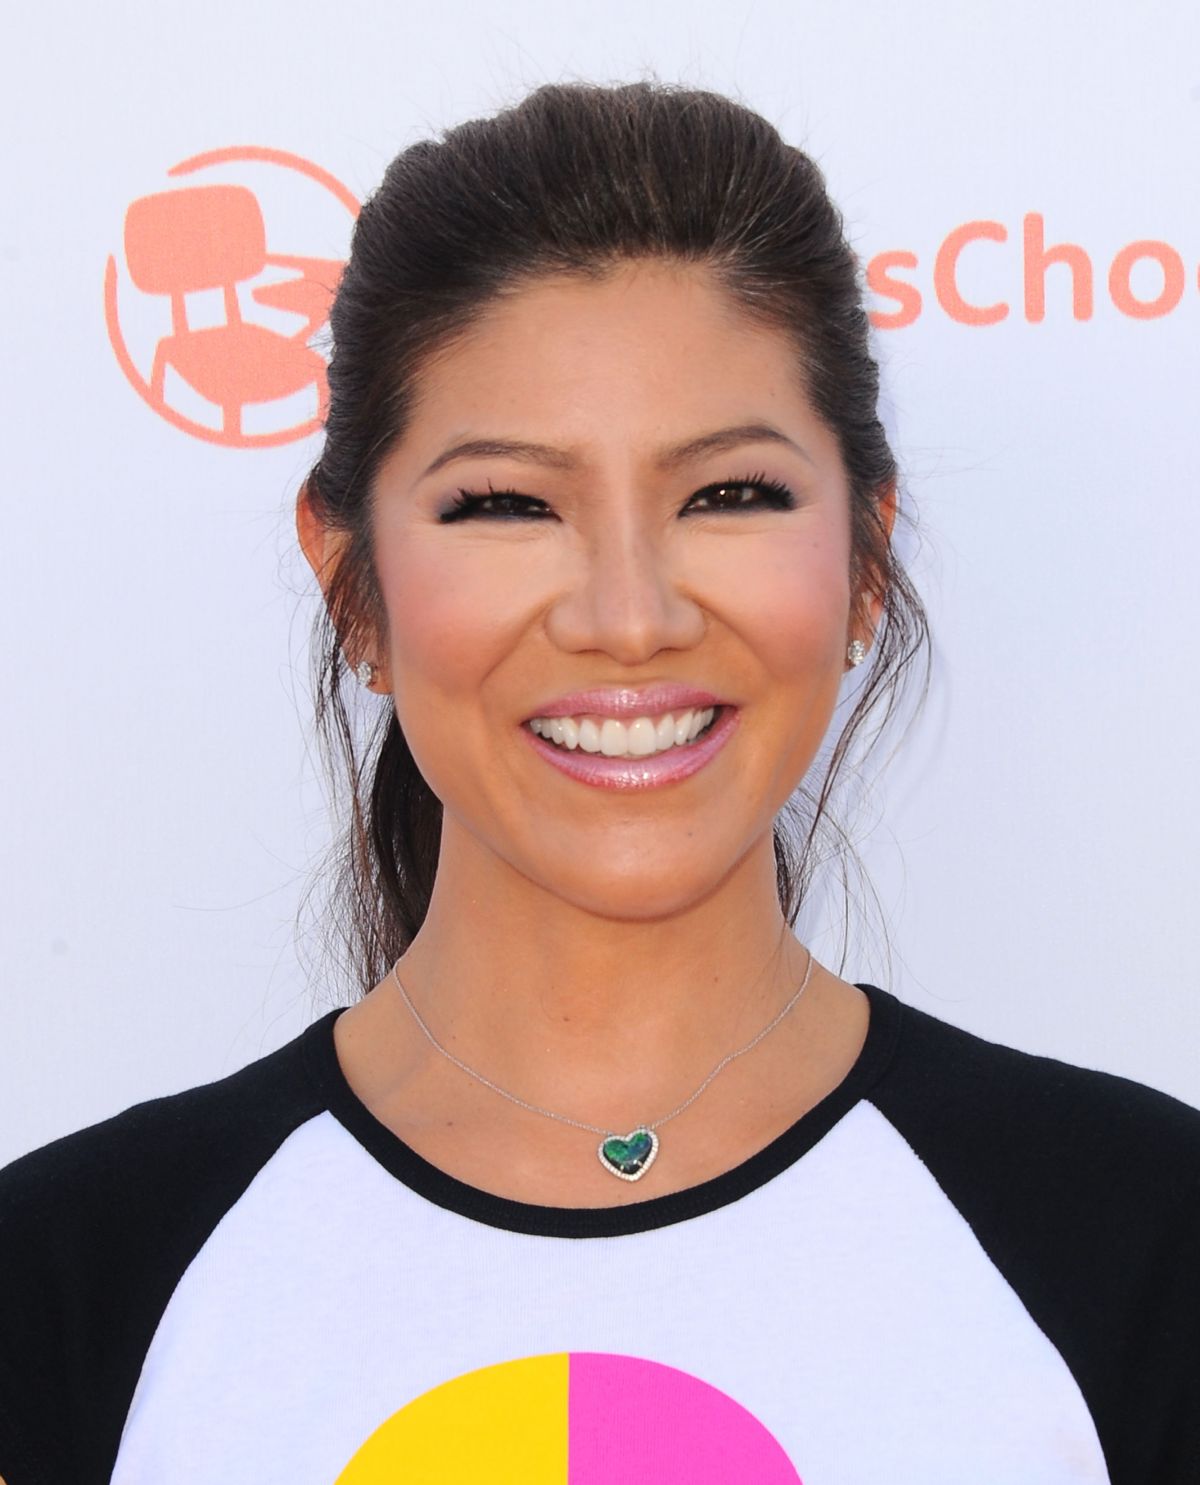 JULIE CHEN at Think It Up Education Initiative Telecast in Santa Monica.